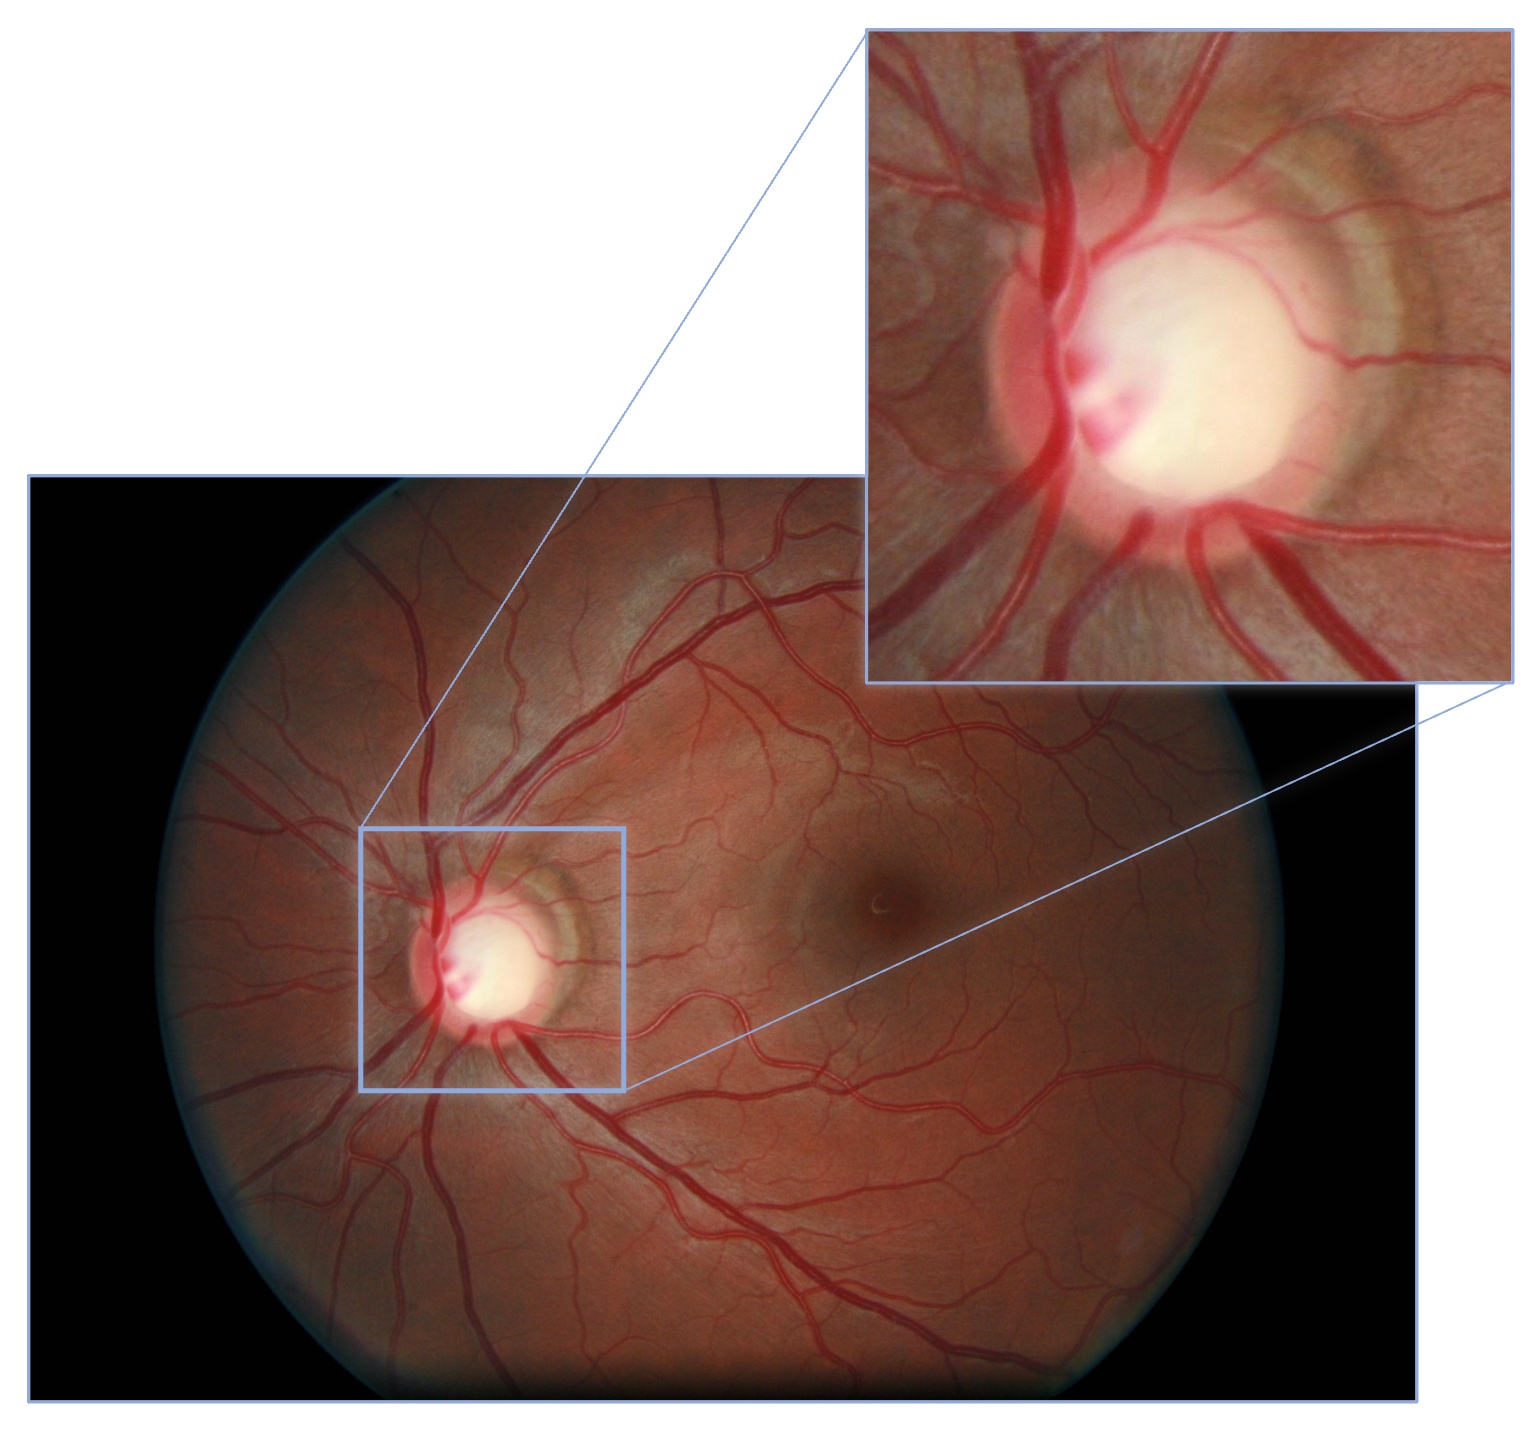 Color fundus image with optic disc pointed out.